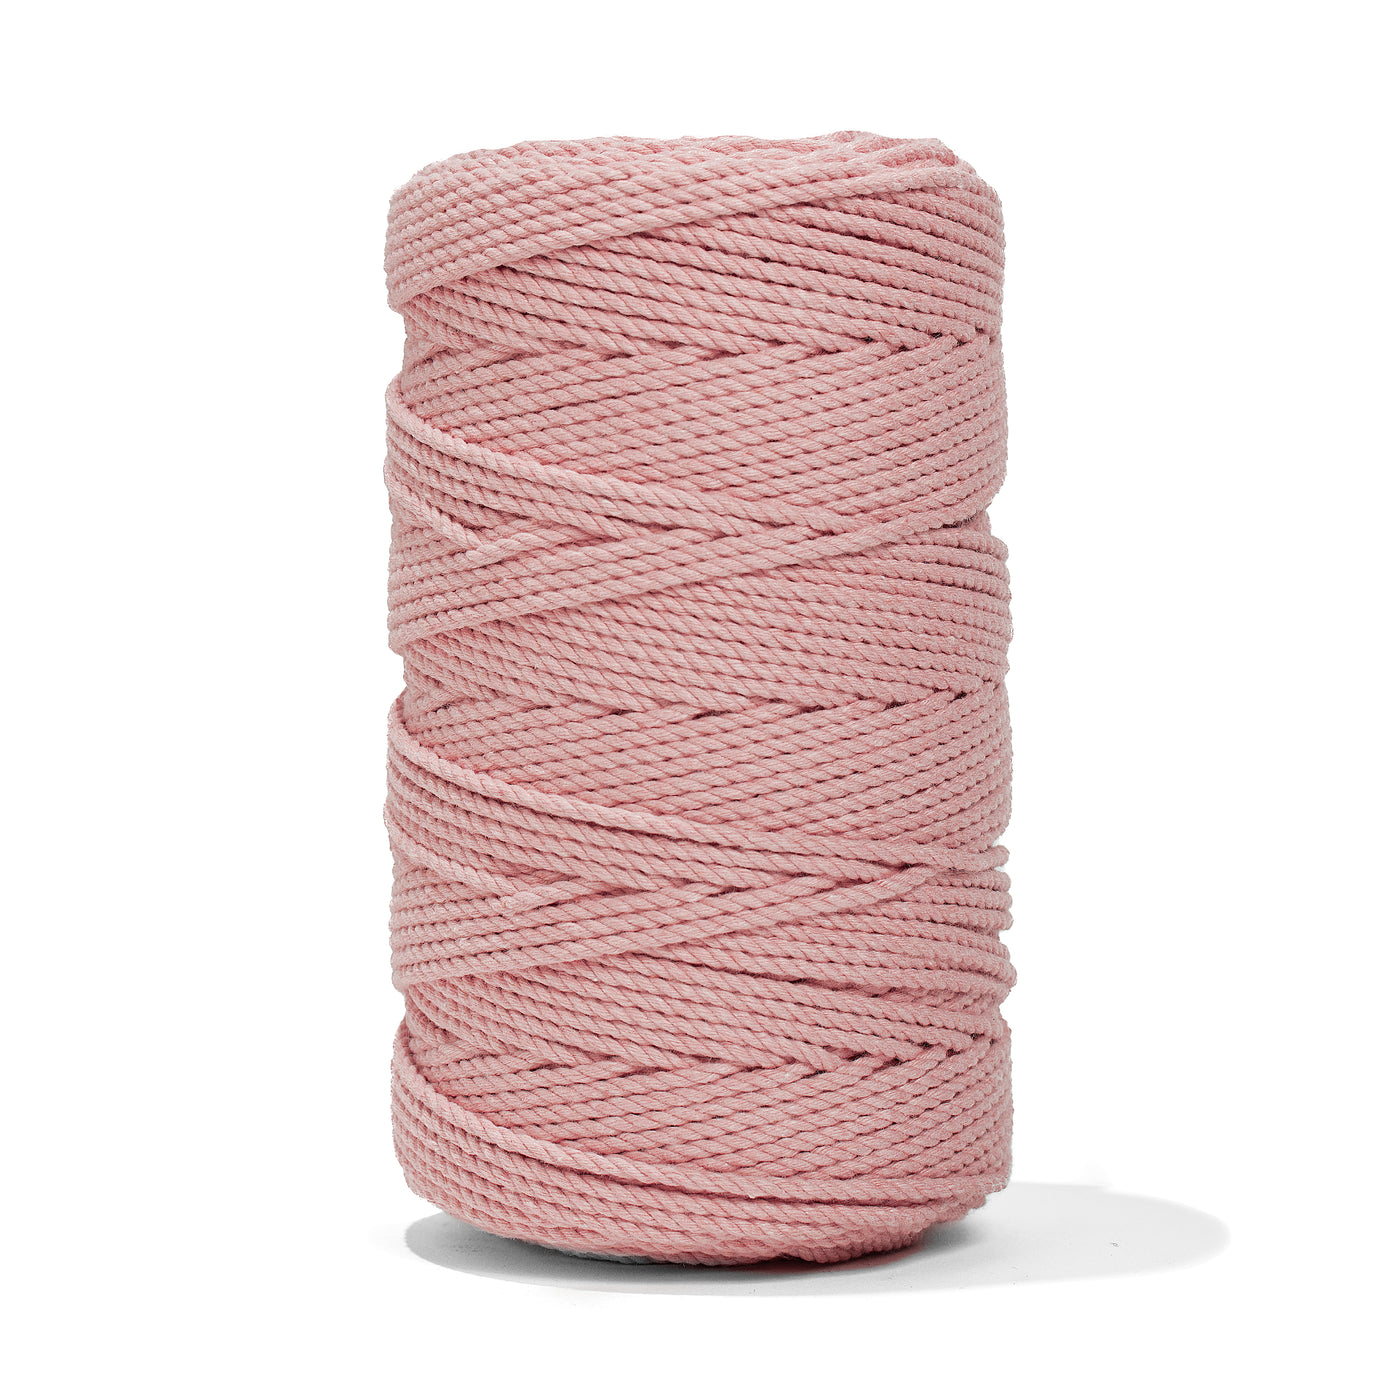 COTTON ROPE ZERO WASTE 2 MM - 3 PLY - PALE PINK COLOR